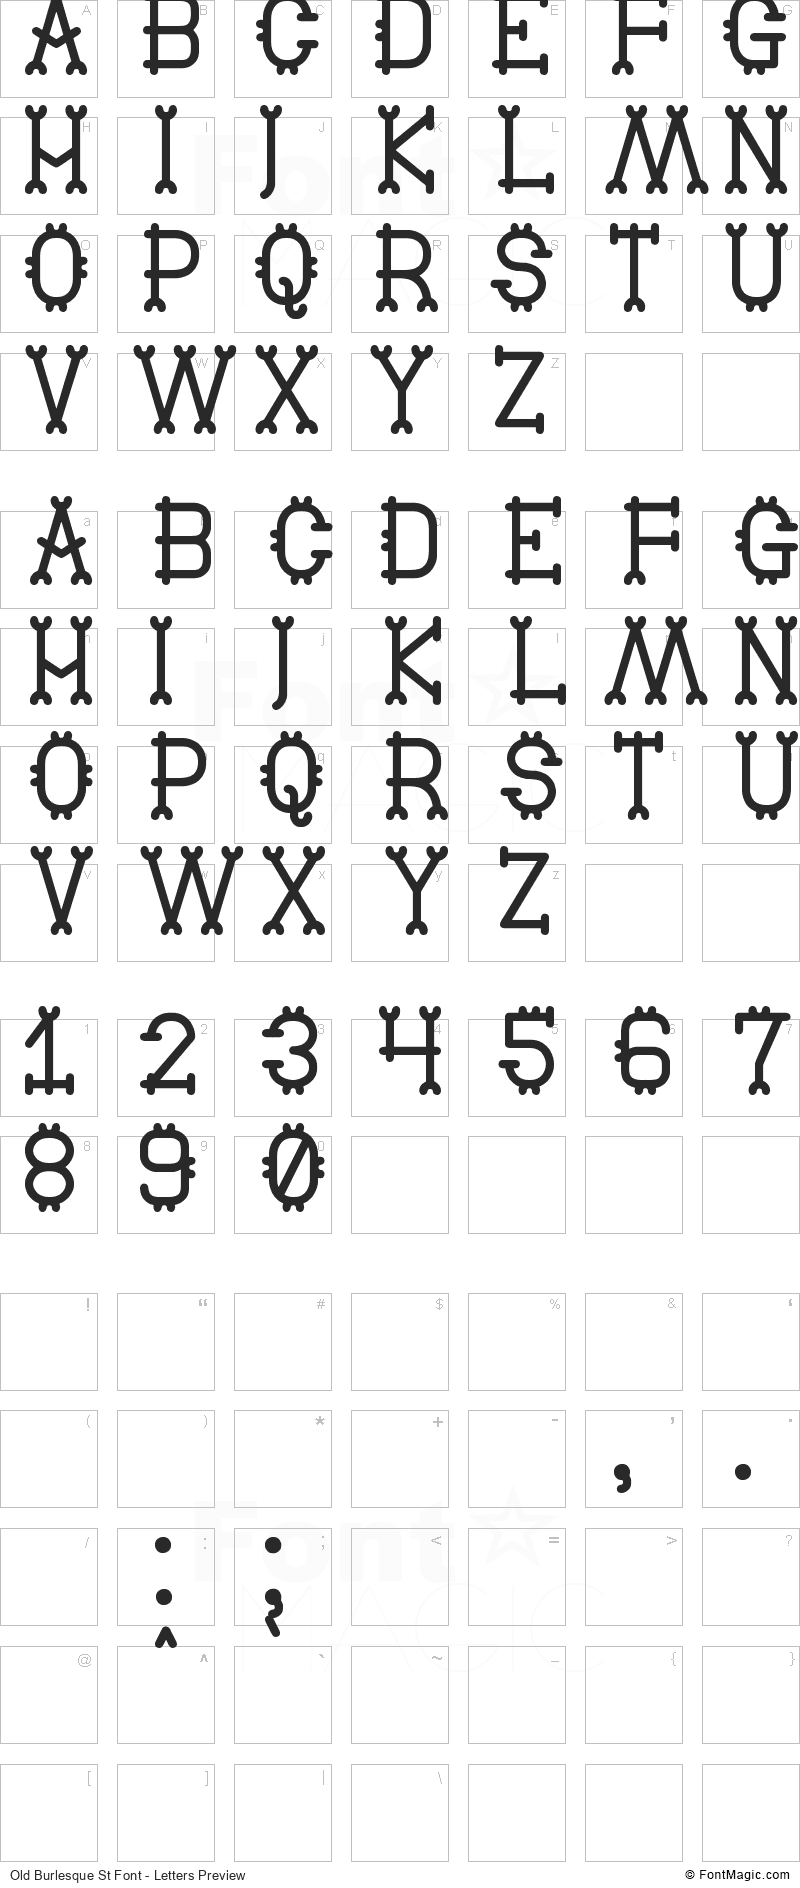 Old Burlesque St Font - All Latters Preview Chart